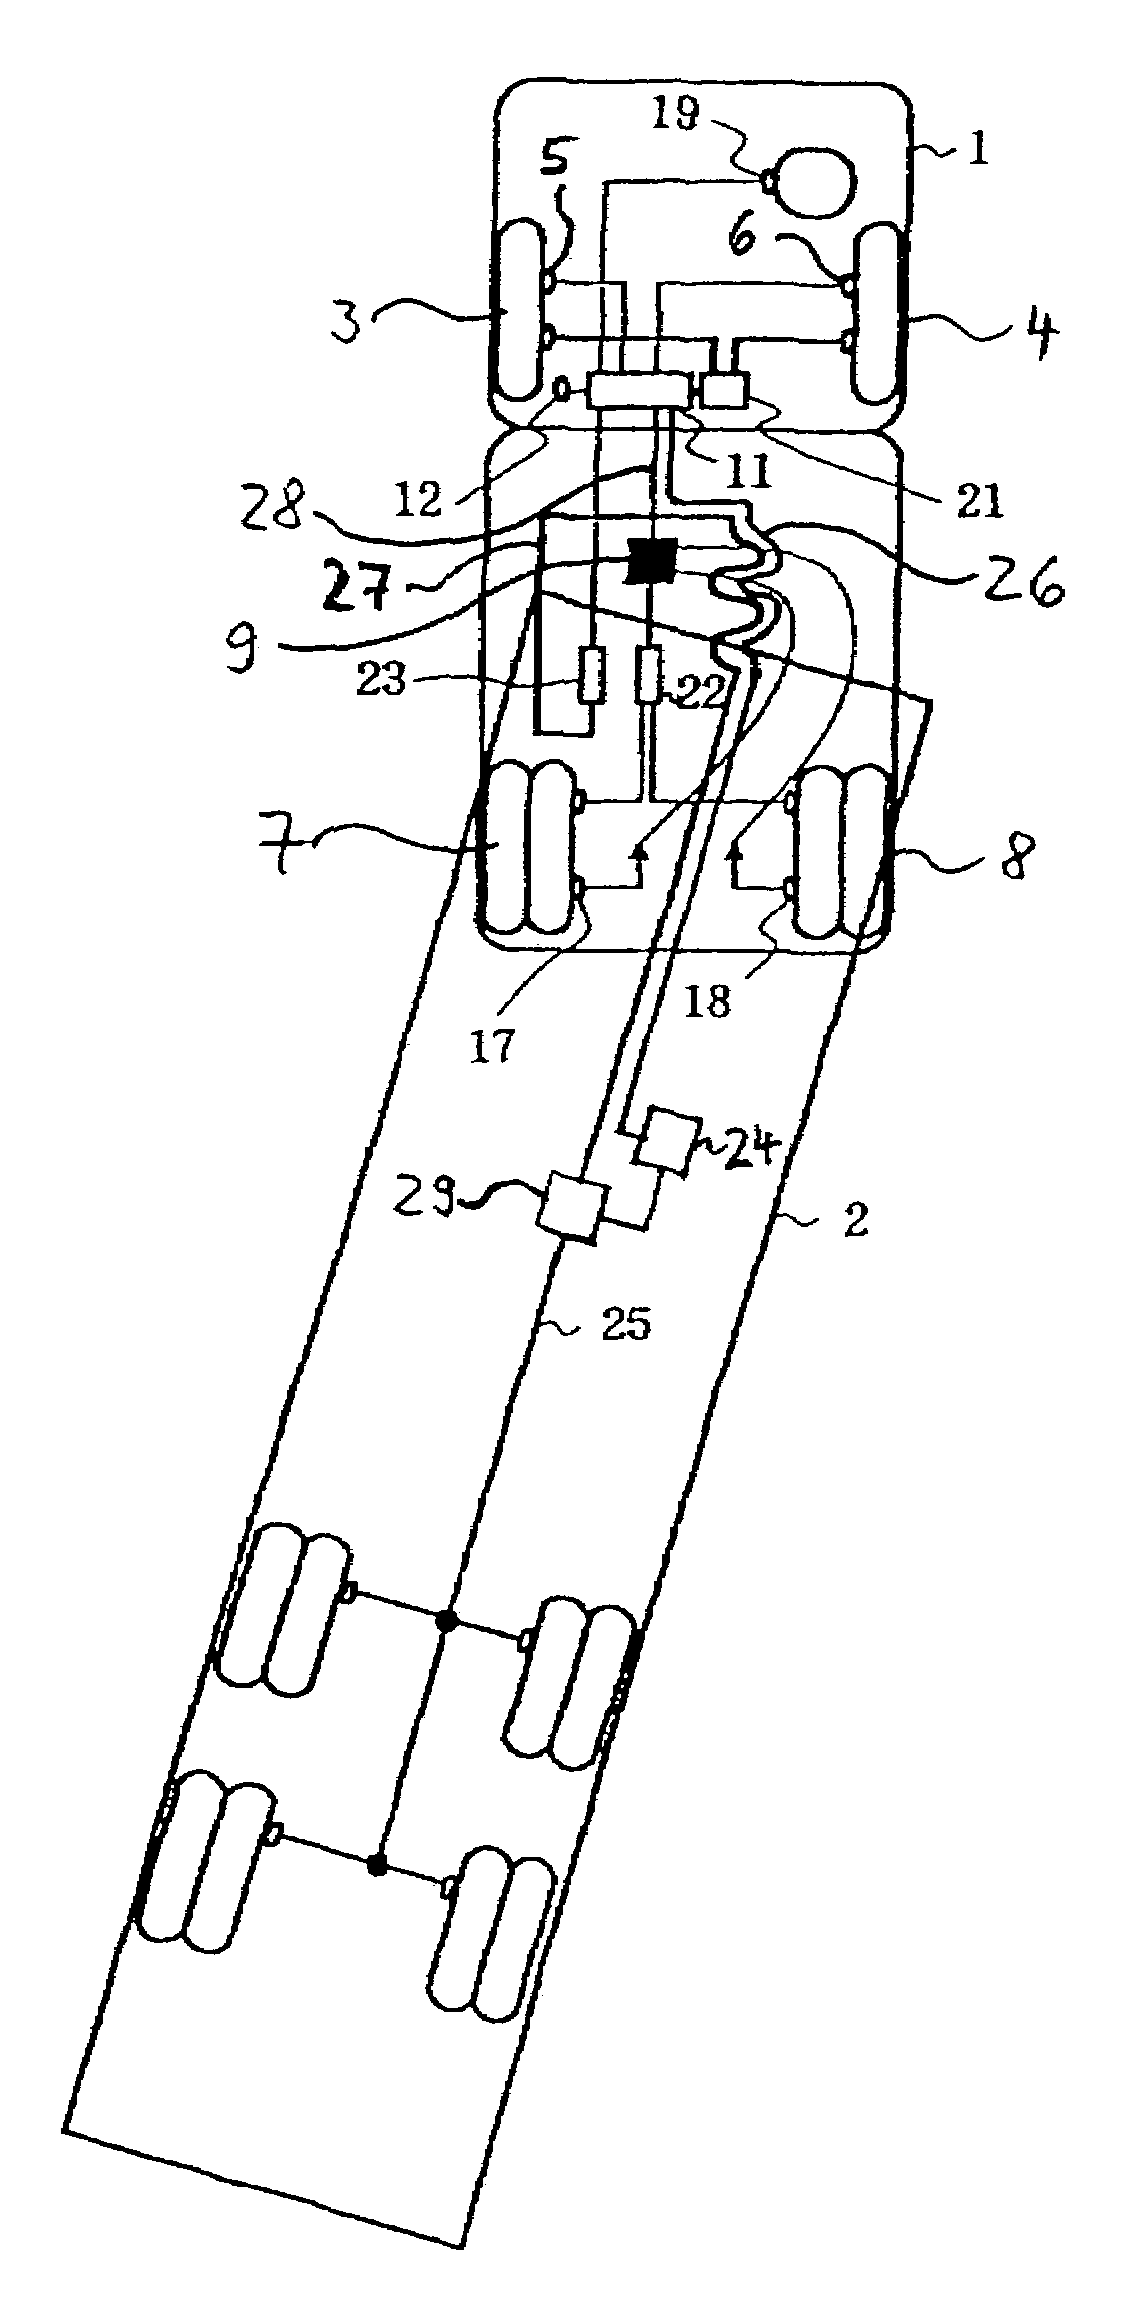 Method for controlling the brake system of a vehicle train